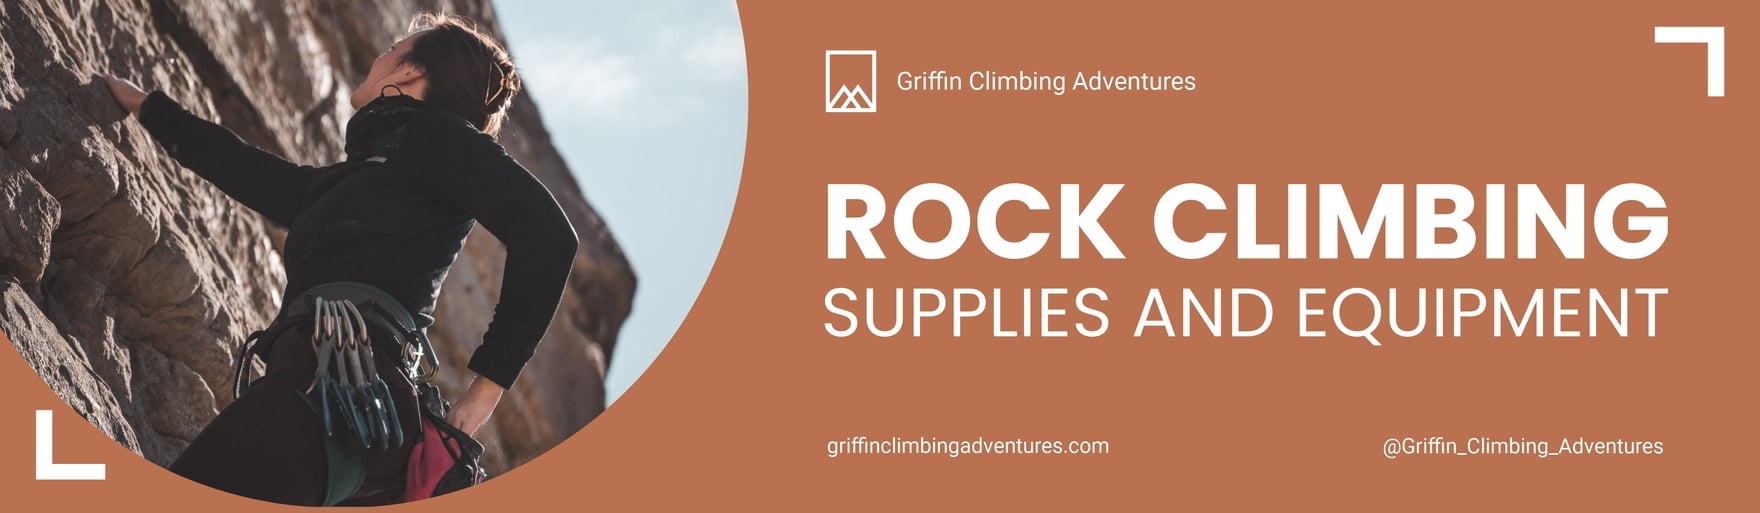 Climbing Sport Billboard Template in Word, Google Docs, Apple Pages, Publisher